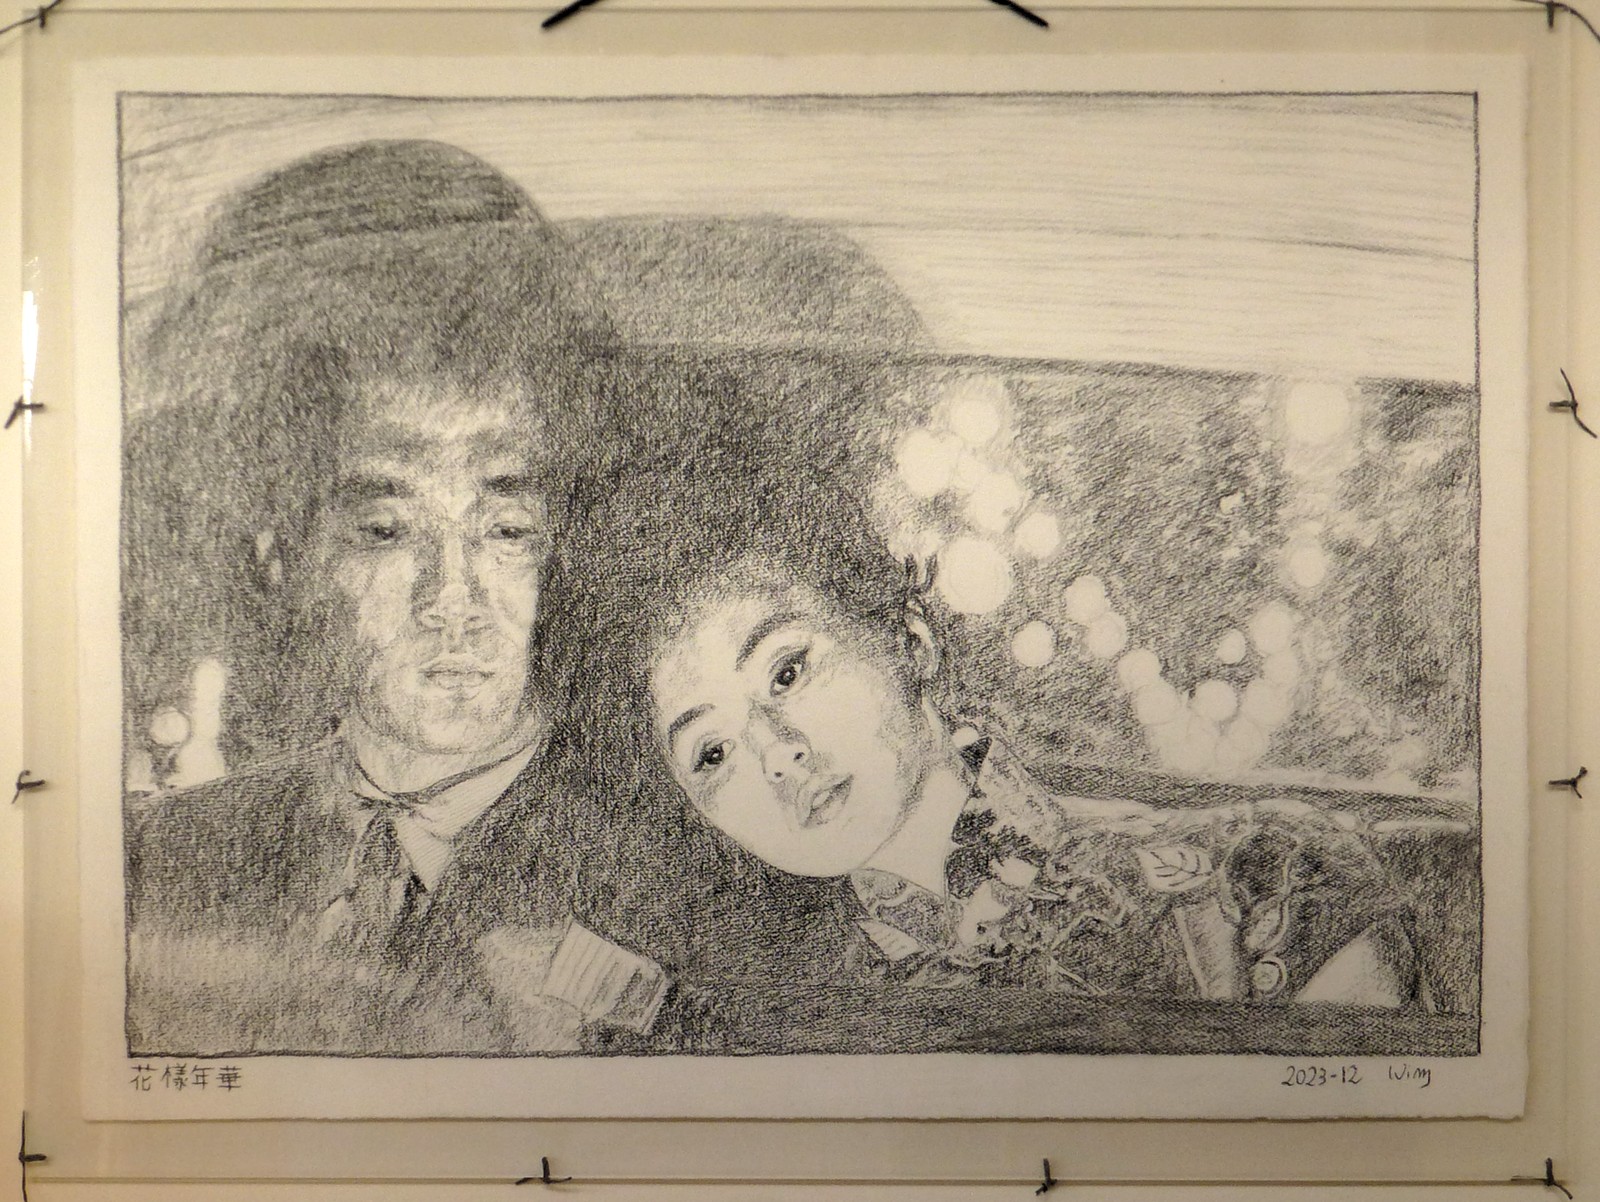 A black and white pencil drawing of a young Kantonese couple sitting in a taxi. She has her head on his shoulder. Their heads throw strong shadows on the pale ceiling. He is wearing a dark suit, she a qipao. Through the rear window, many points of light are visible.